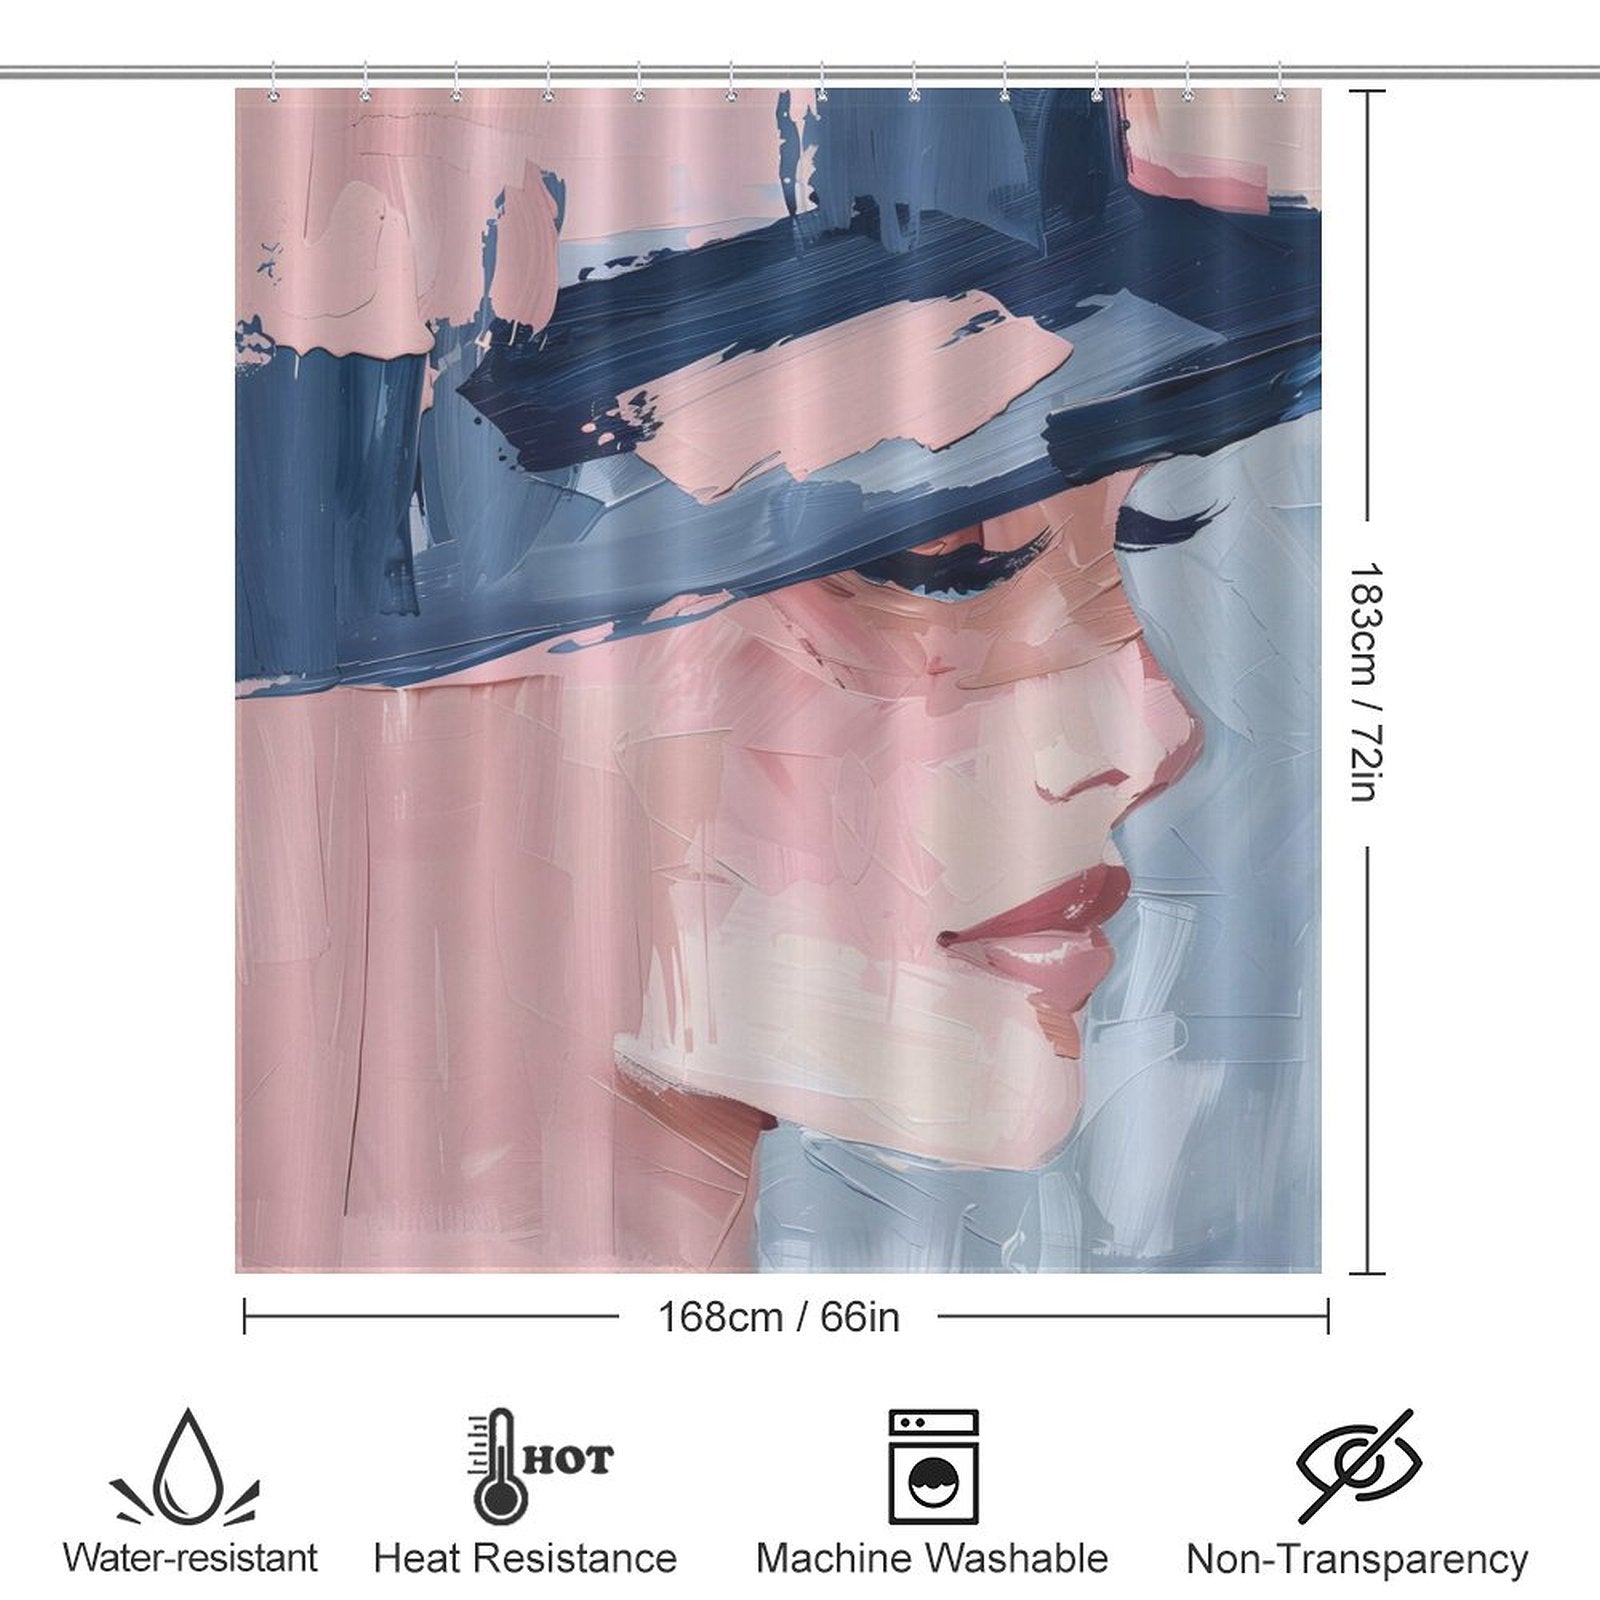 A Mid Century Women Face Abstract Aesthetic Oil Painting Modern Art Blush Pink Navy Blue Cream Shower Curtain-Cottoncat featuring an abstract aesthetic oil painting of a woman's face wearing a hat. Dimensions: 183cm x 168cm. The blush pink, navy blue, and cream design is water-resistant, heat-resistant, machine washable, and non-transparent by Cotton Cat.